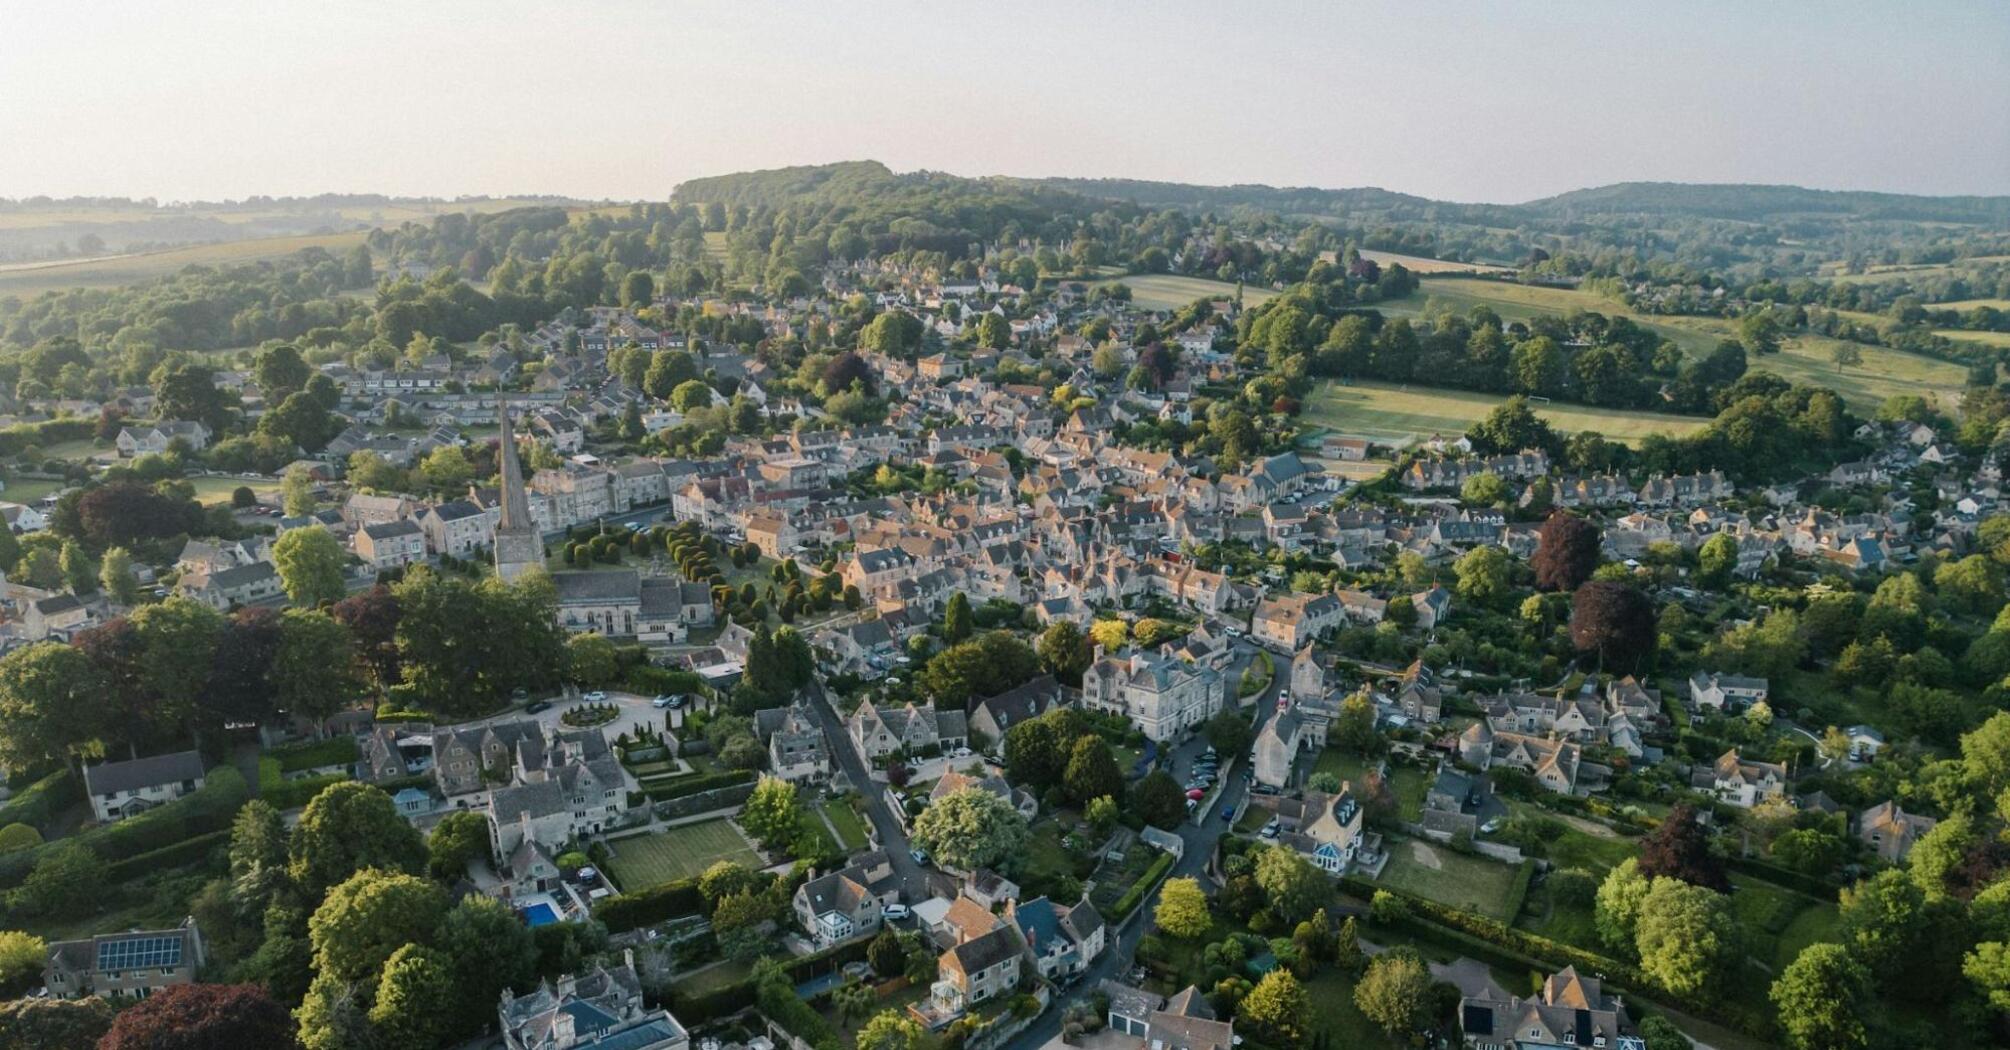 Aerial view of a charming village in the South Cotswolds, featuring historic buildings and lush greenery